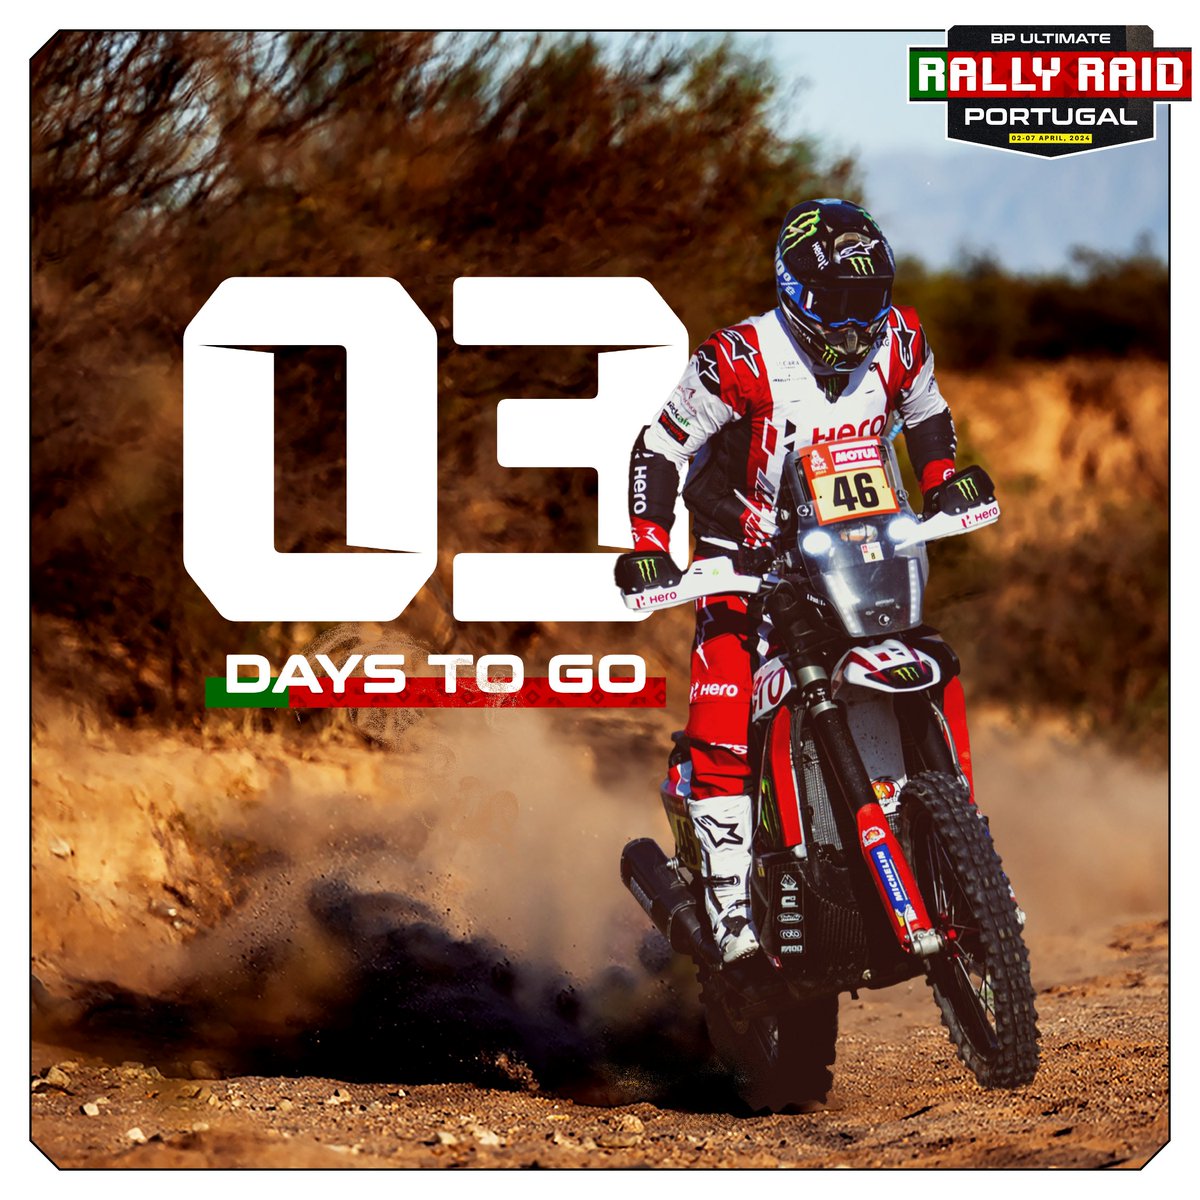 Just 3 more days to go! Brace yourself for heart-pounding action and breathtaking landscapes that will ignite your sense🔥 #RaceTheLimits #RallyRaidPortugal @OfficialW2RC @HeroMotoCorp @MonsterEnergy #racing #rallyracing #heromotosports #motorsport #offroading #offroadracing